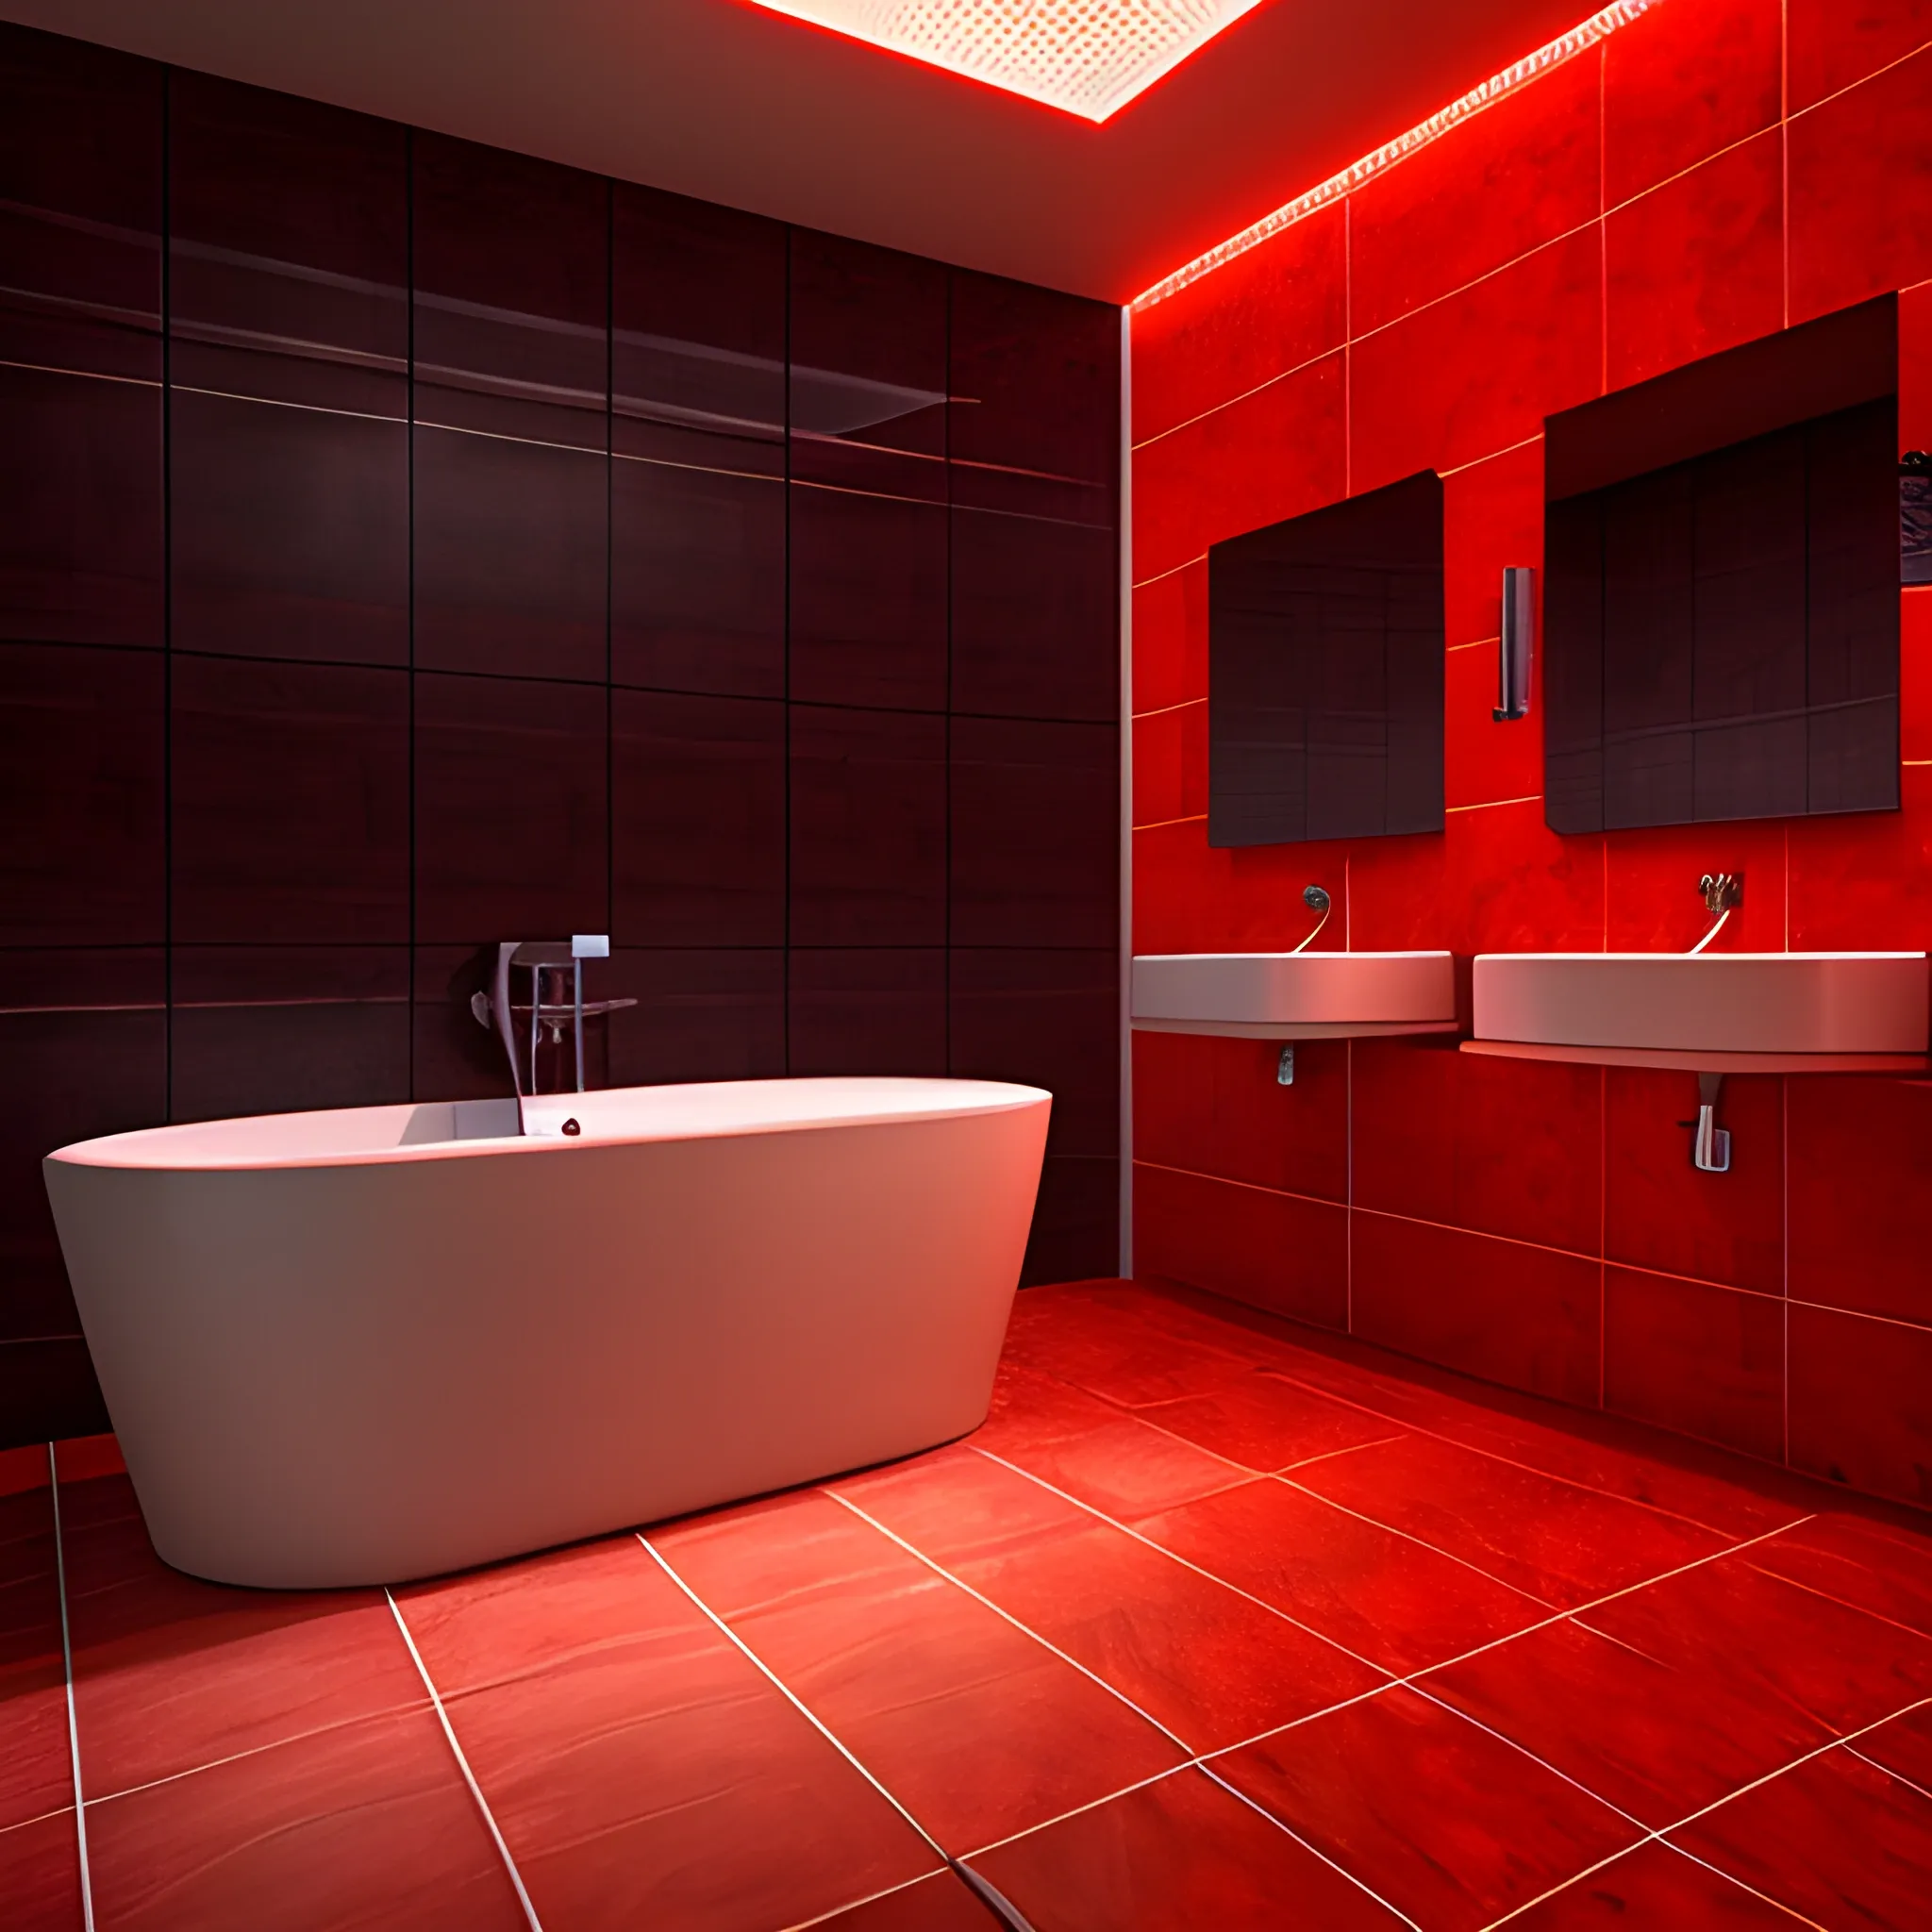 a dark lonely tiled bathroom terma with red lights aesthetic by the night, 3D